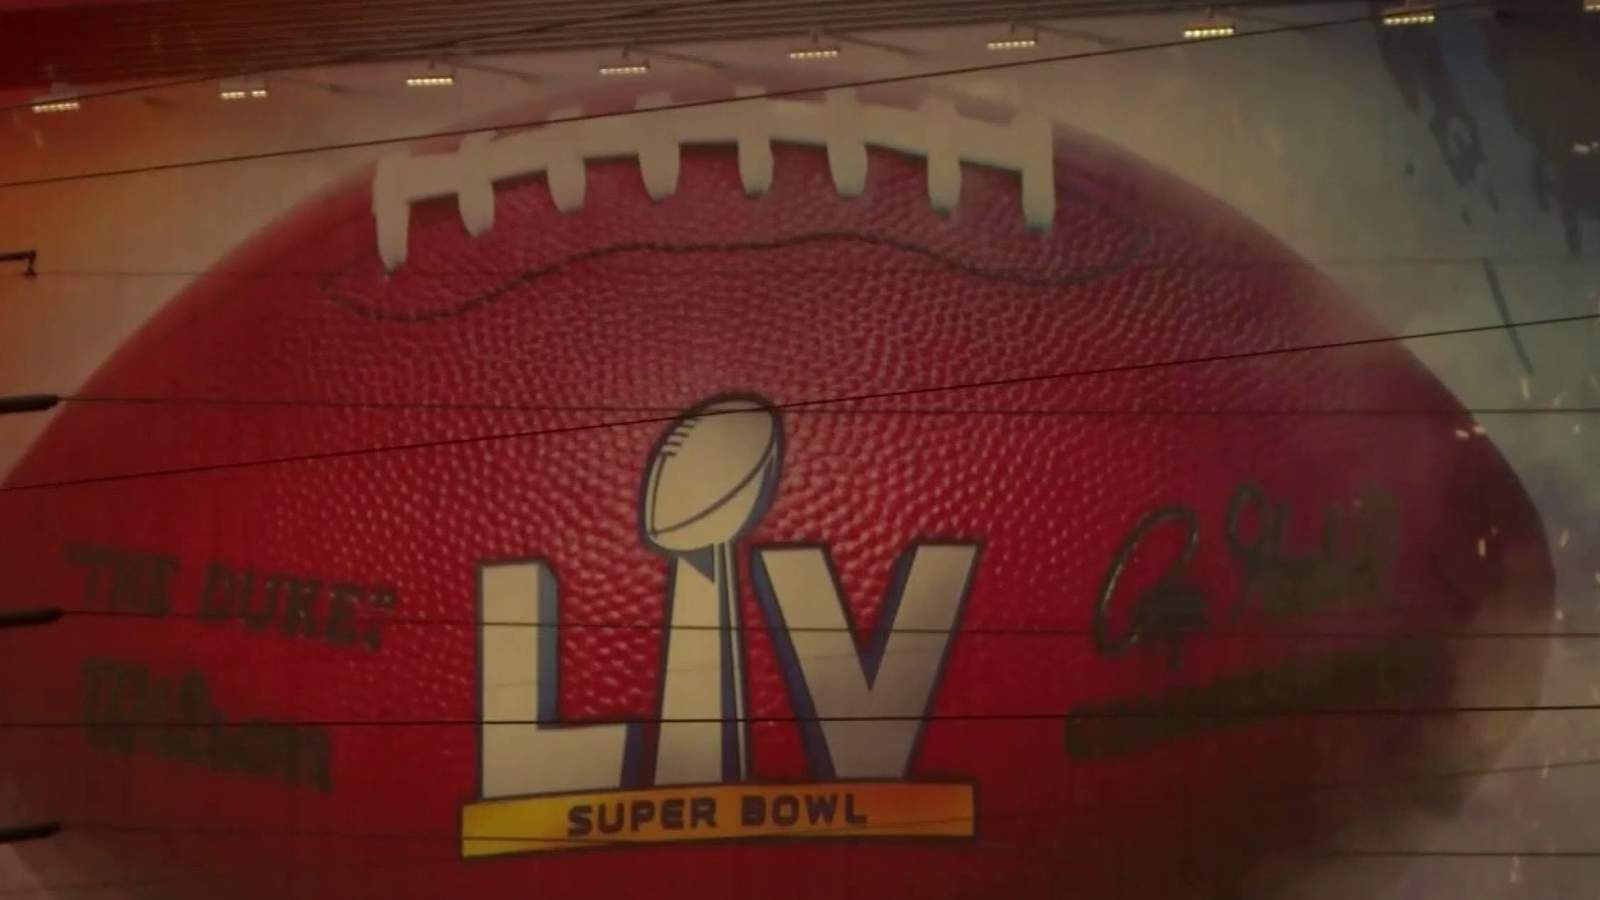 Florida Attorney General concerned about human trafficking ahead of Super Bowl